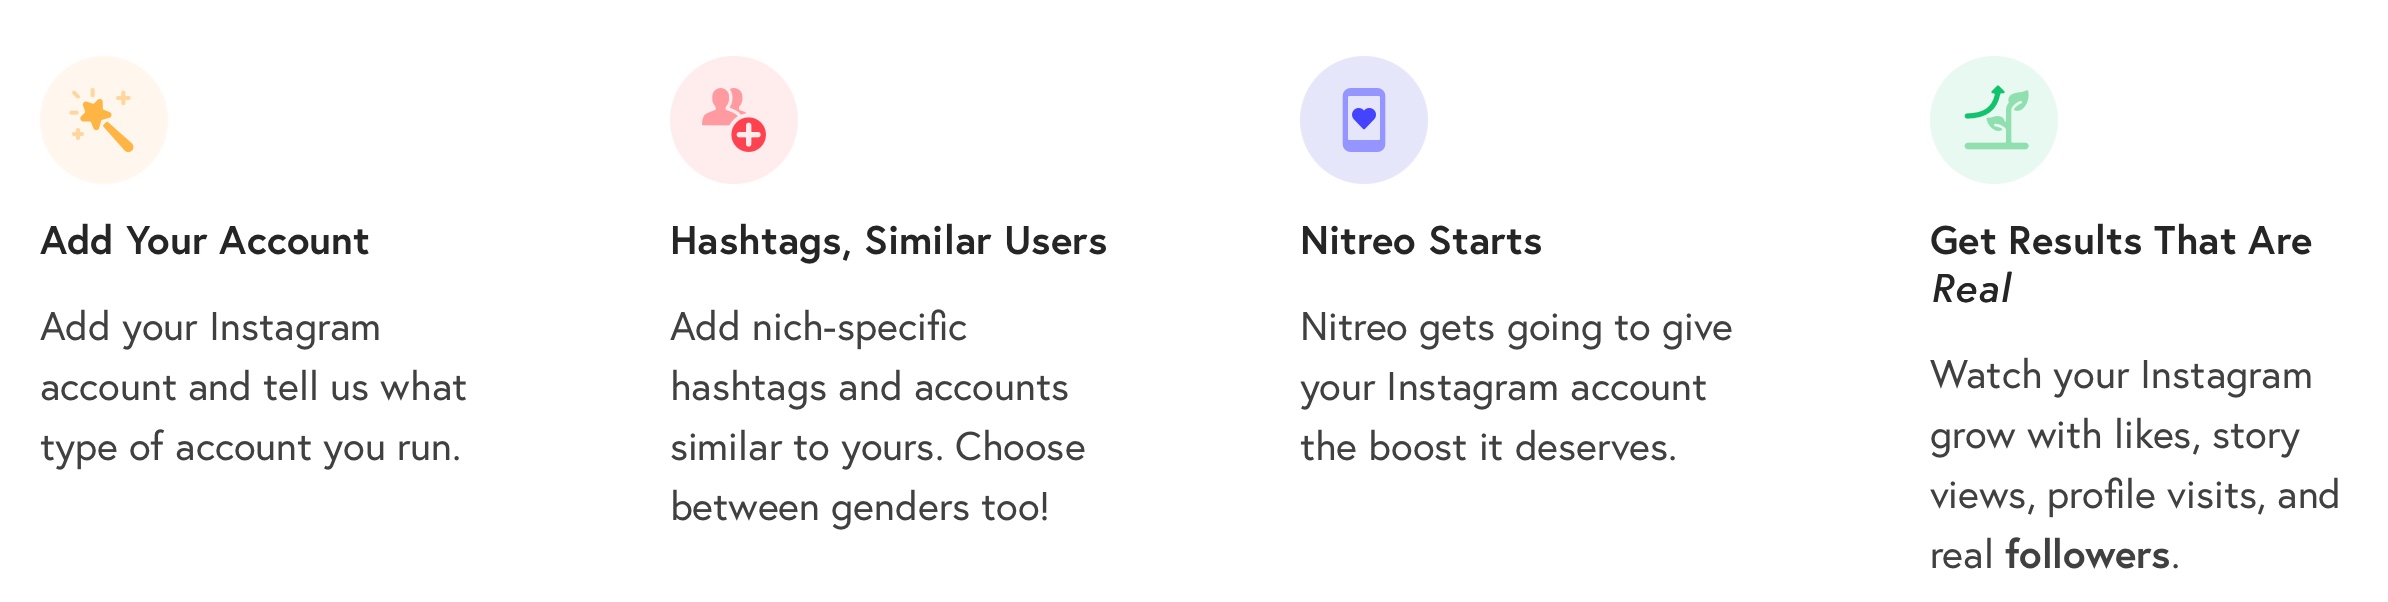 more in-depth details of how nitreo works